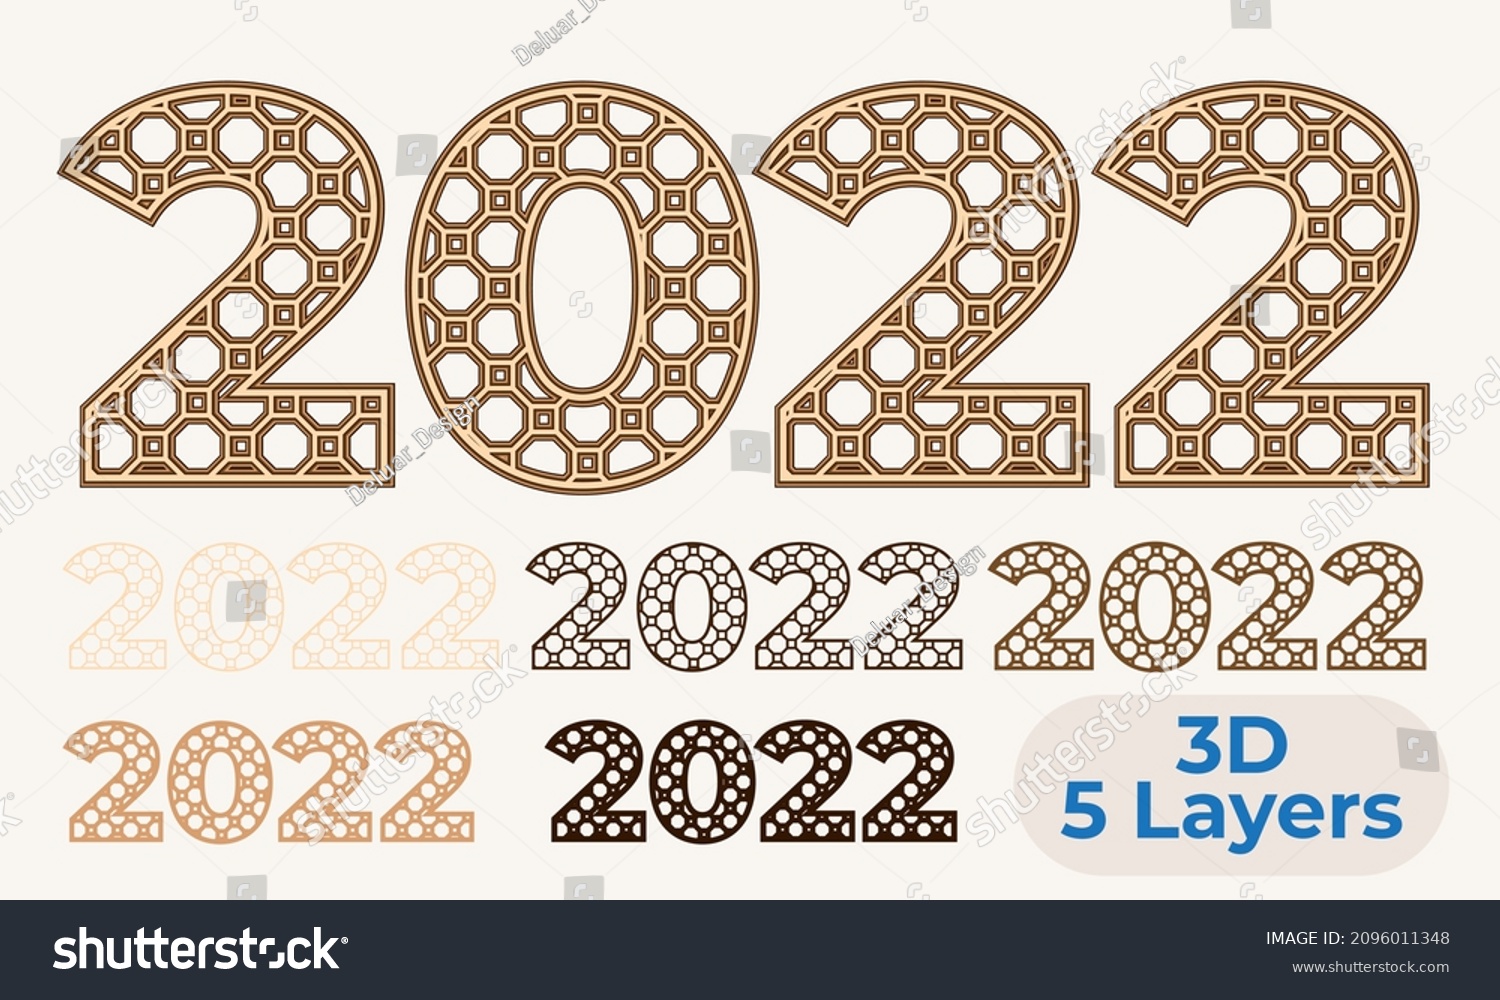 SVG of 2022 New Year Layered 3D SVG Cut File  svg